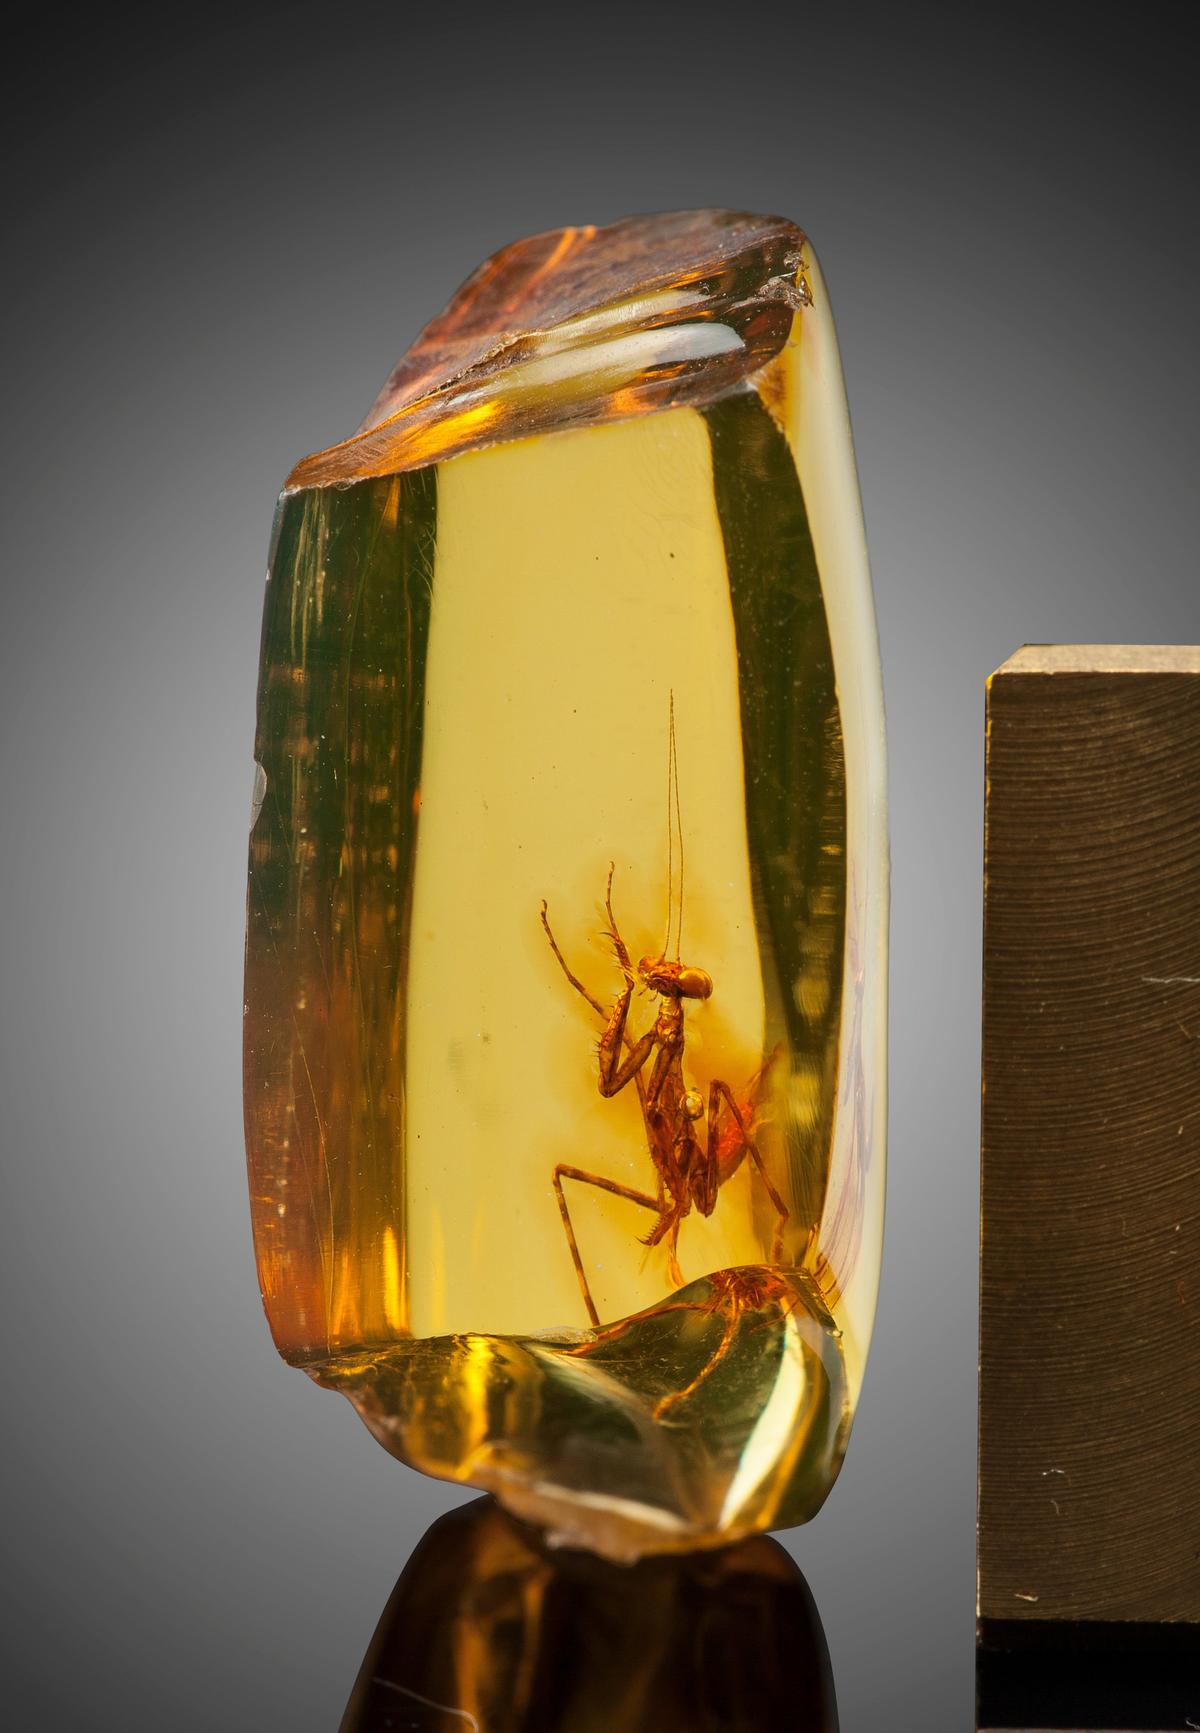 A praying mantis encased in fossilized amber, some 30 million years old. (Courtesy of Heritage Auctions, HA.com)